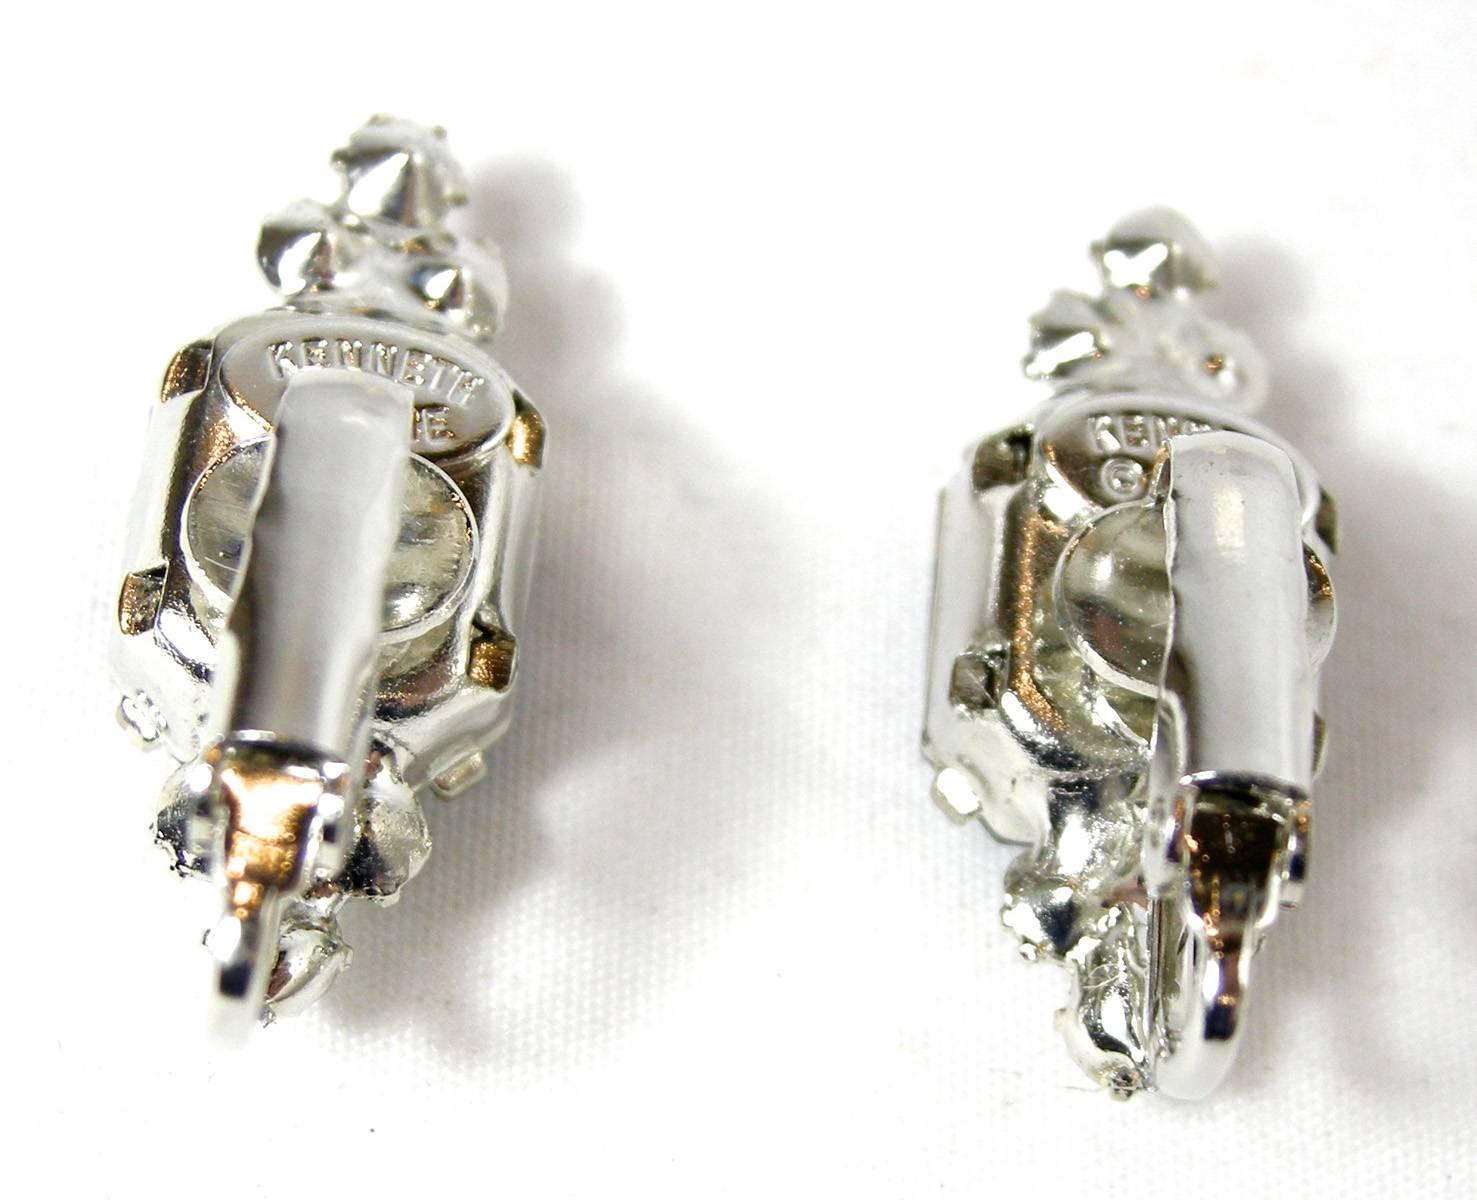 These clip earrings by Kenneth Jay Lane look almost real.  Although they are petite in size, the faux sapphires are prong set in a silver tone metal finish.  Three tiny rhinestones compliment the top and the bottom making these earrings look